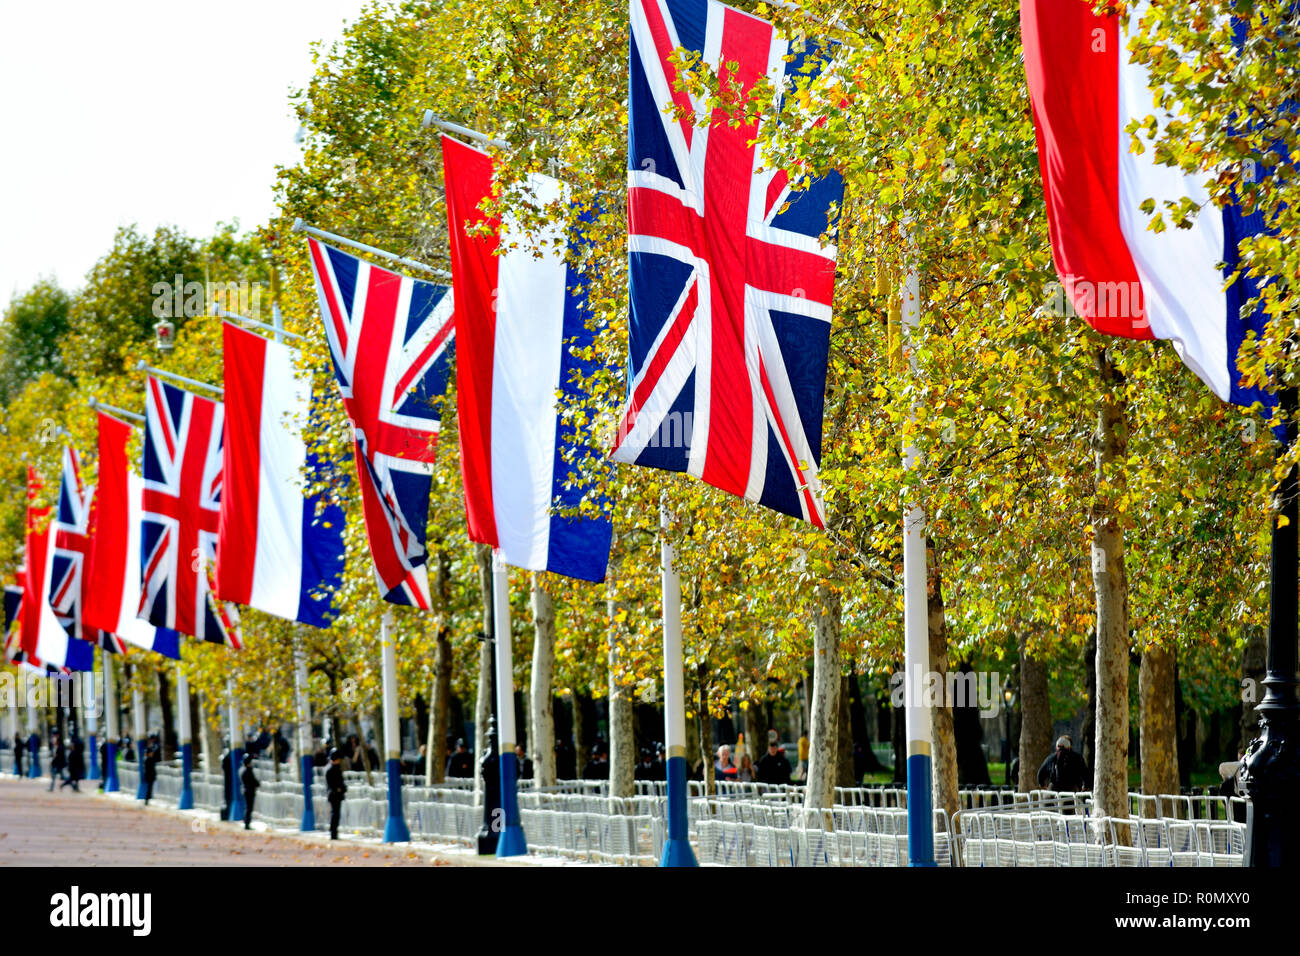 British and Dutch flags in the Mall for a royal visit, October 2018, London, England, UK. Stock Photo